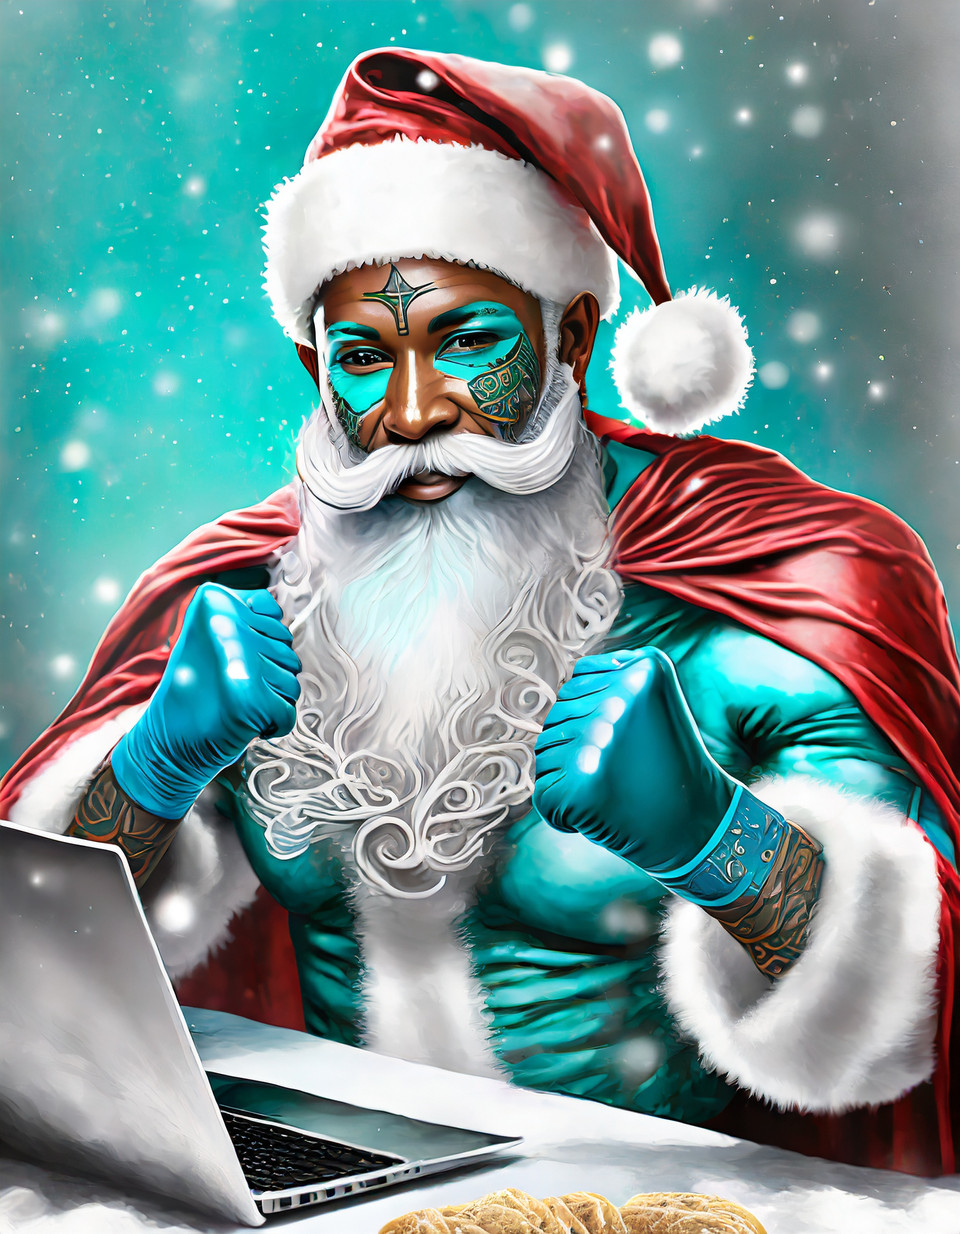 Tattooed superhero Santa Claus with turquoise cape and gloves analyzes data on a laptop